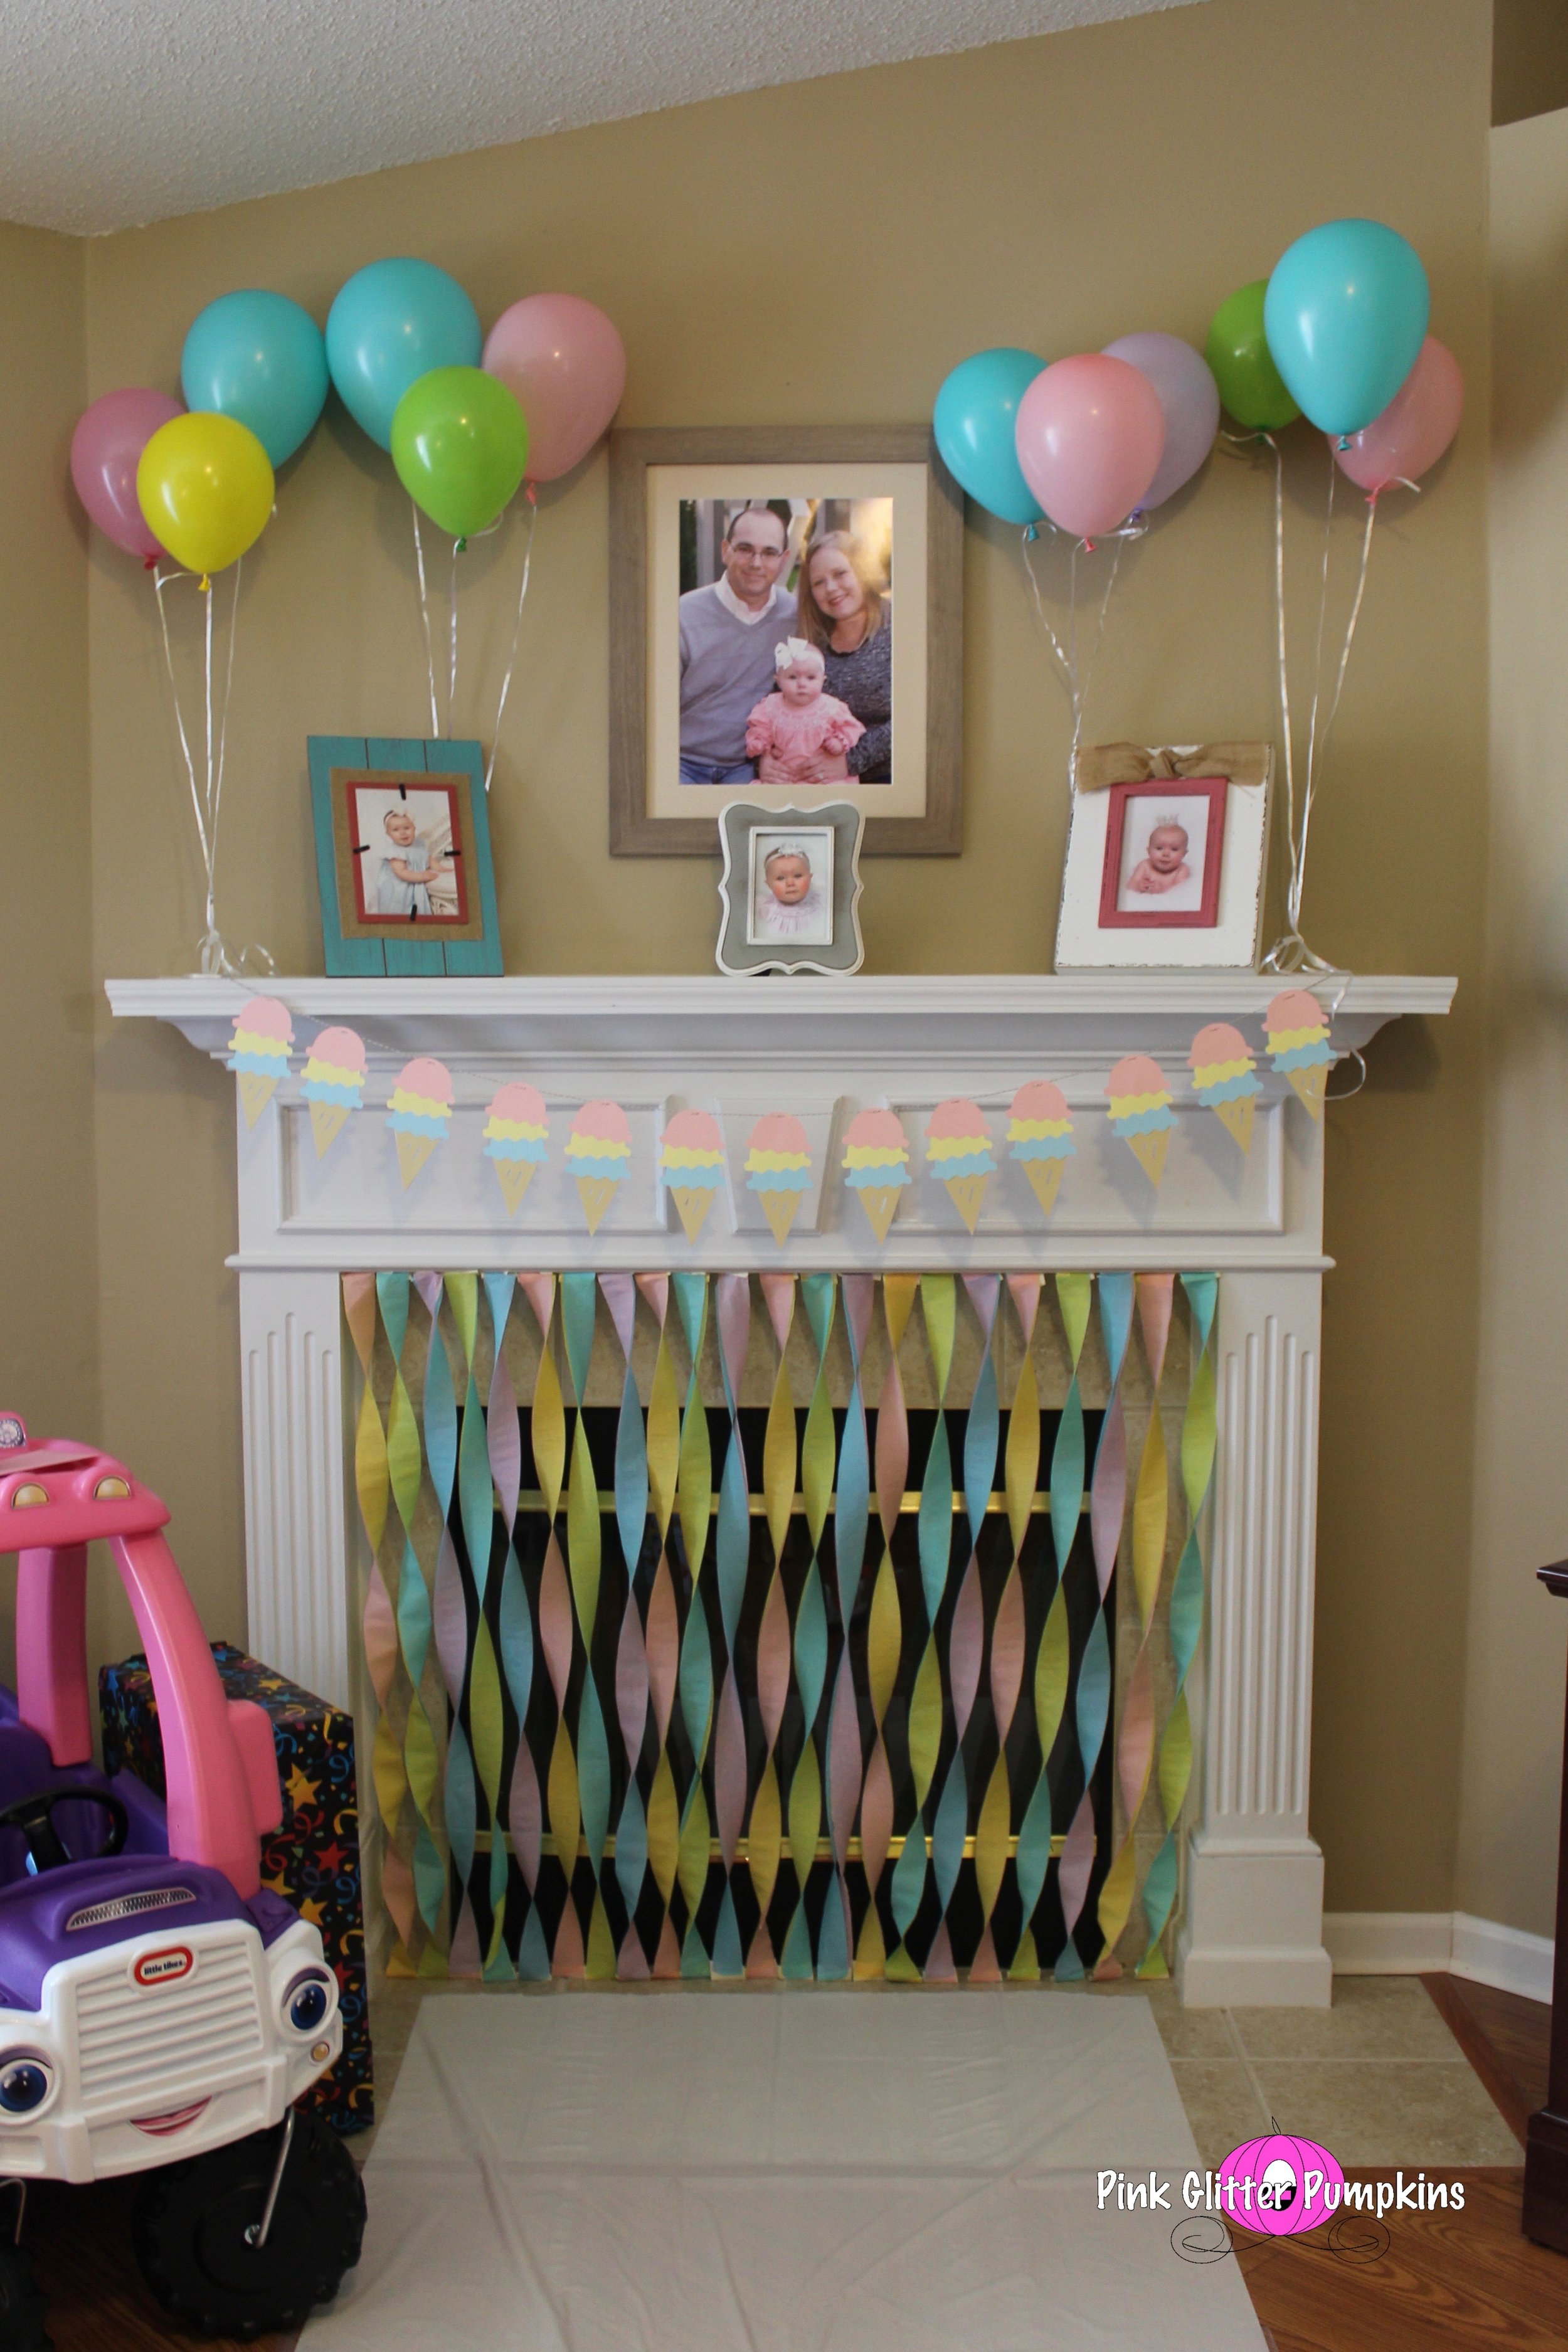 Streamers. Easy an effective idea, but with a little bit more sparkle!